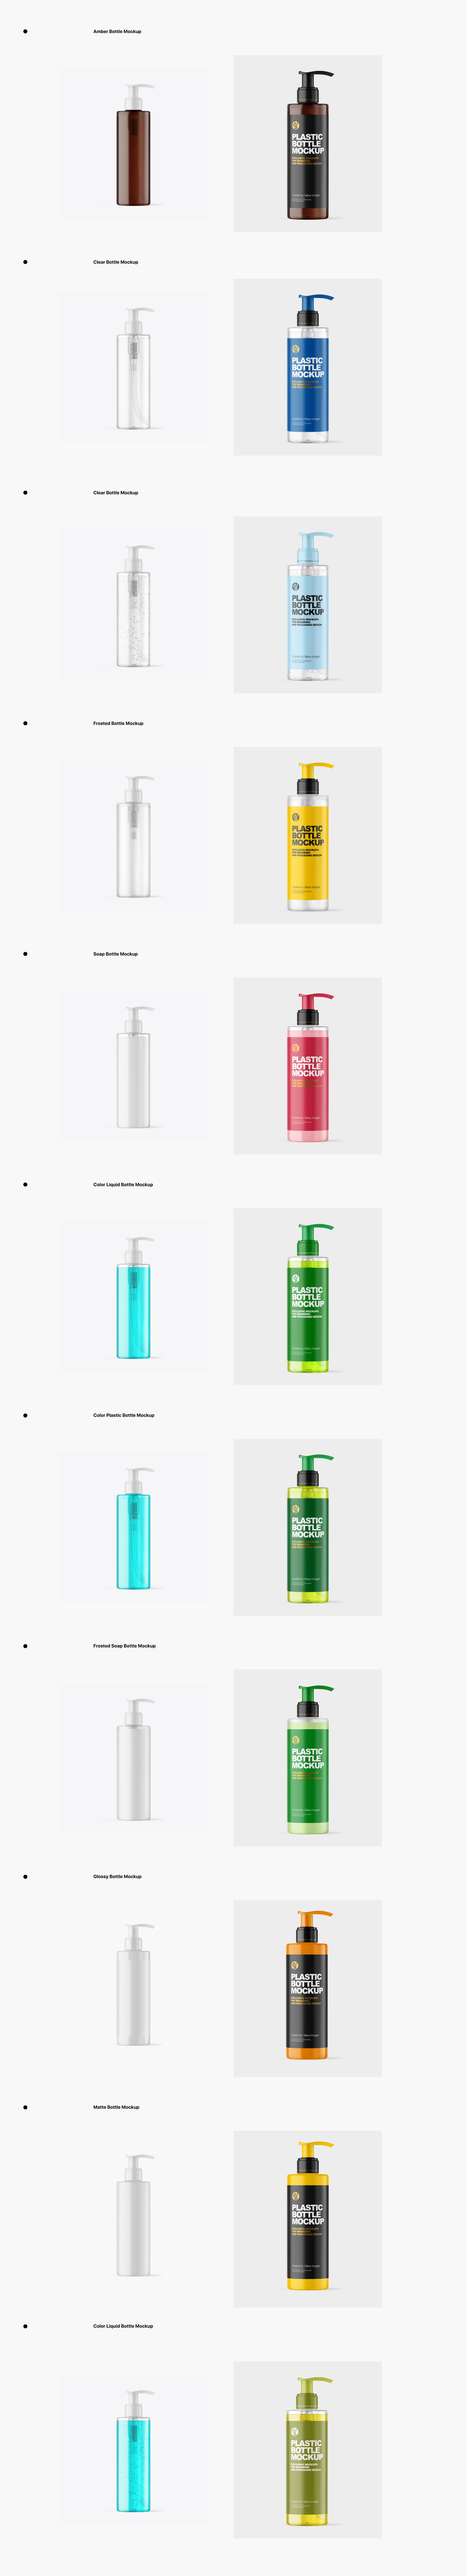 Download 200 Ml Cosmetic Bottles With Pump Mockups Psd On Behance